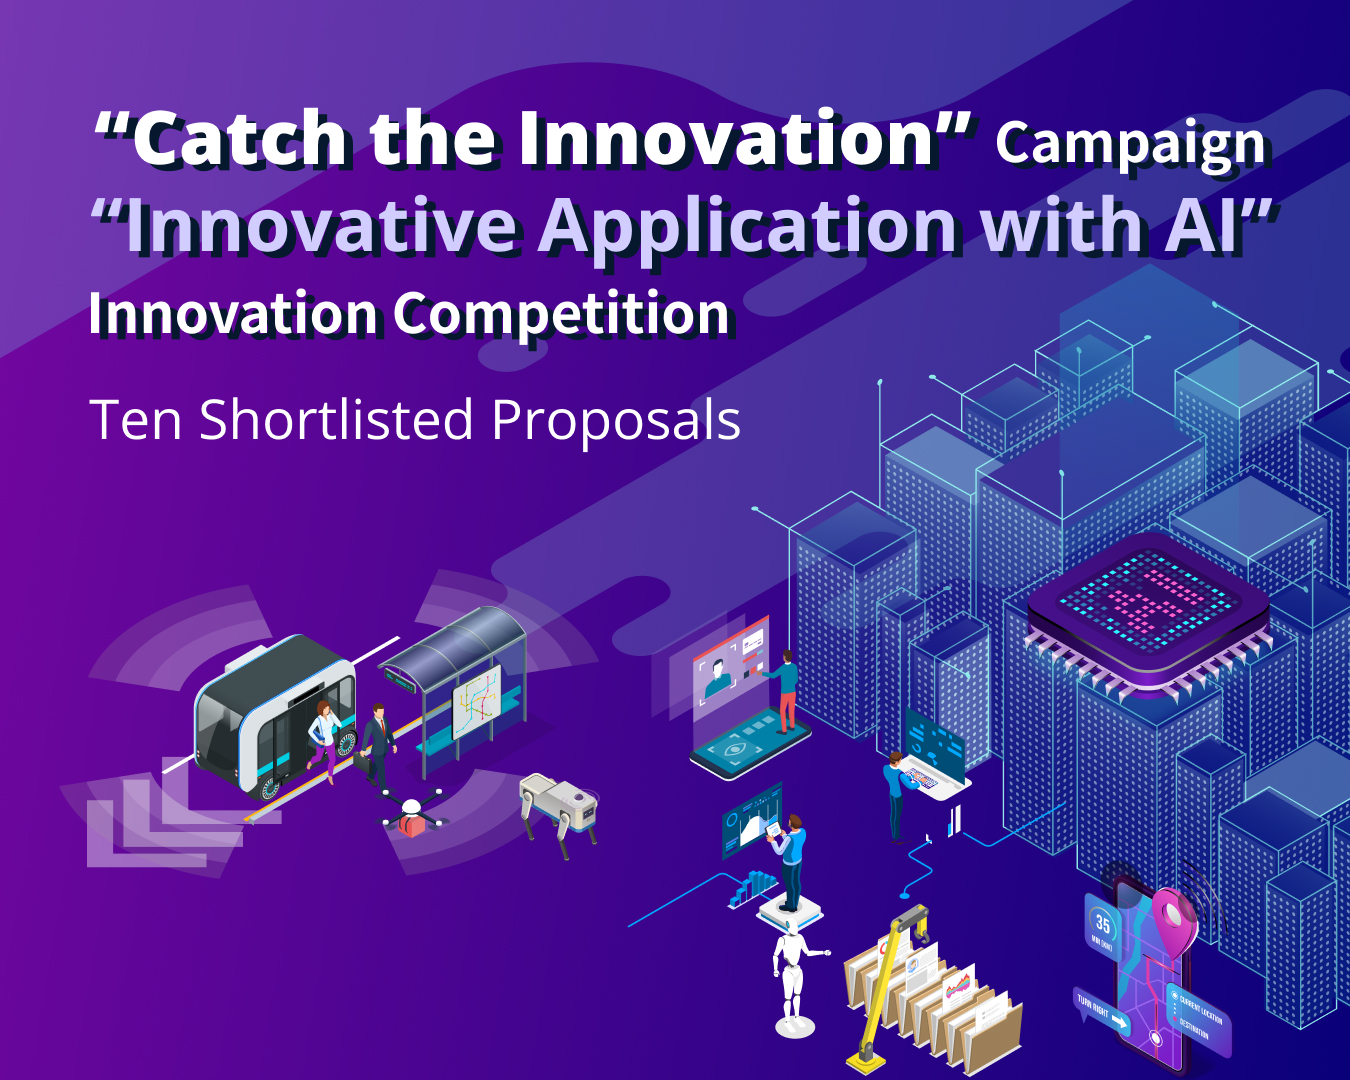 "Innovative Application with AI" Innovation Competition - Shortlisted Proposals